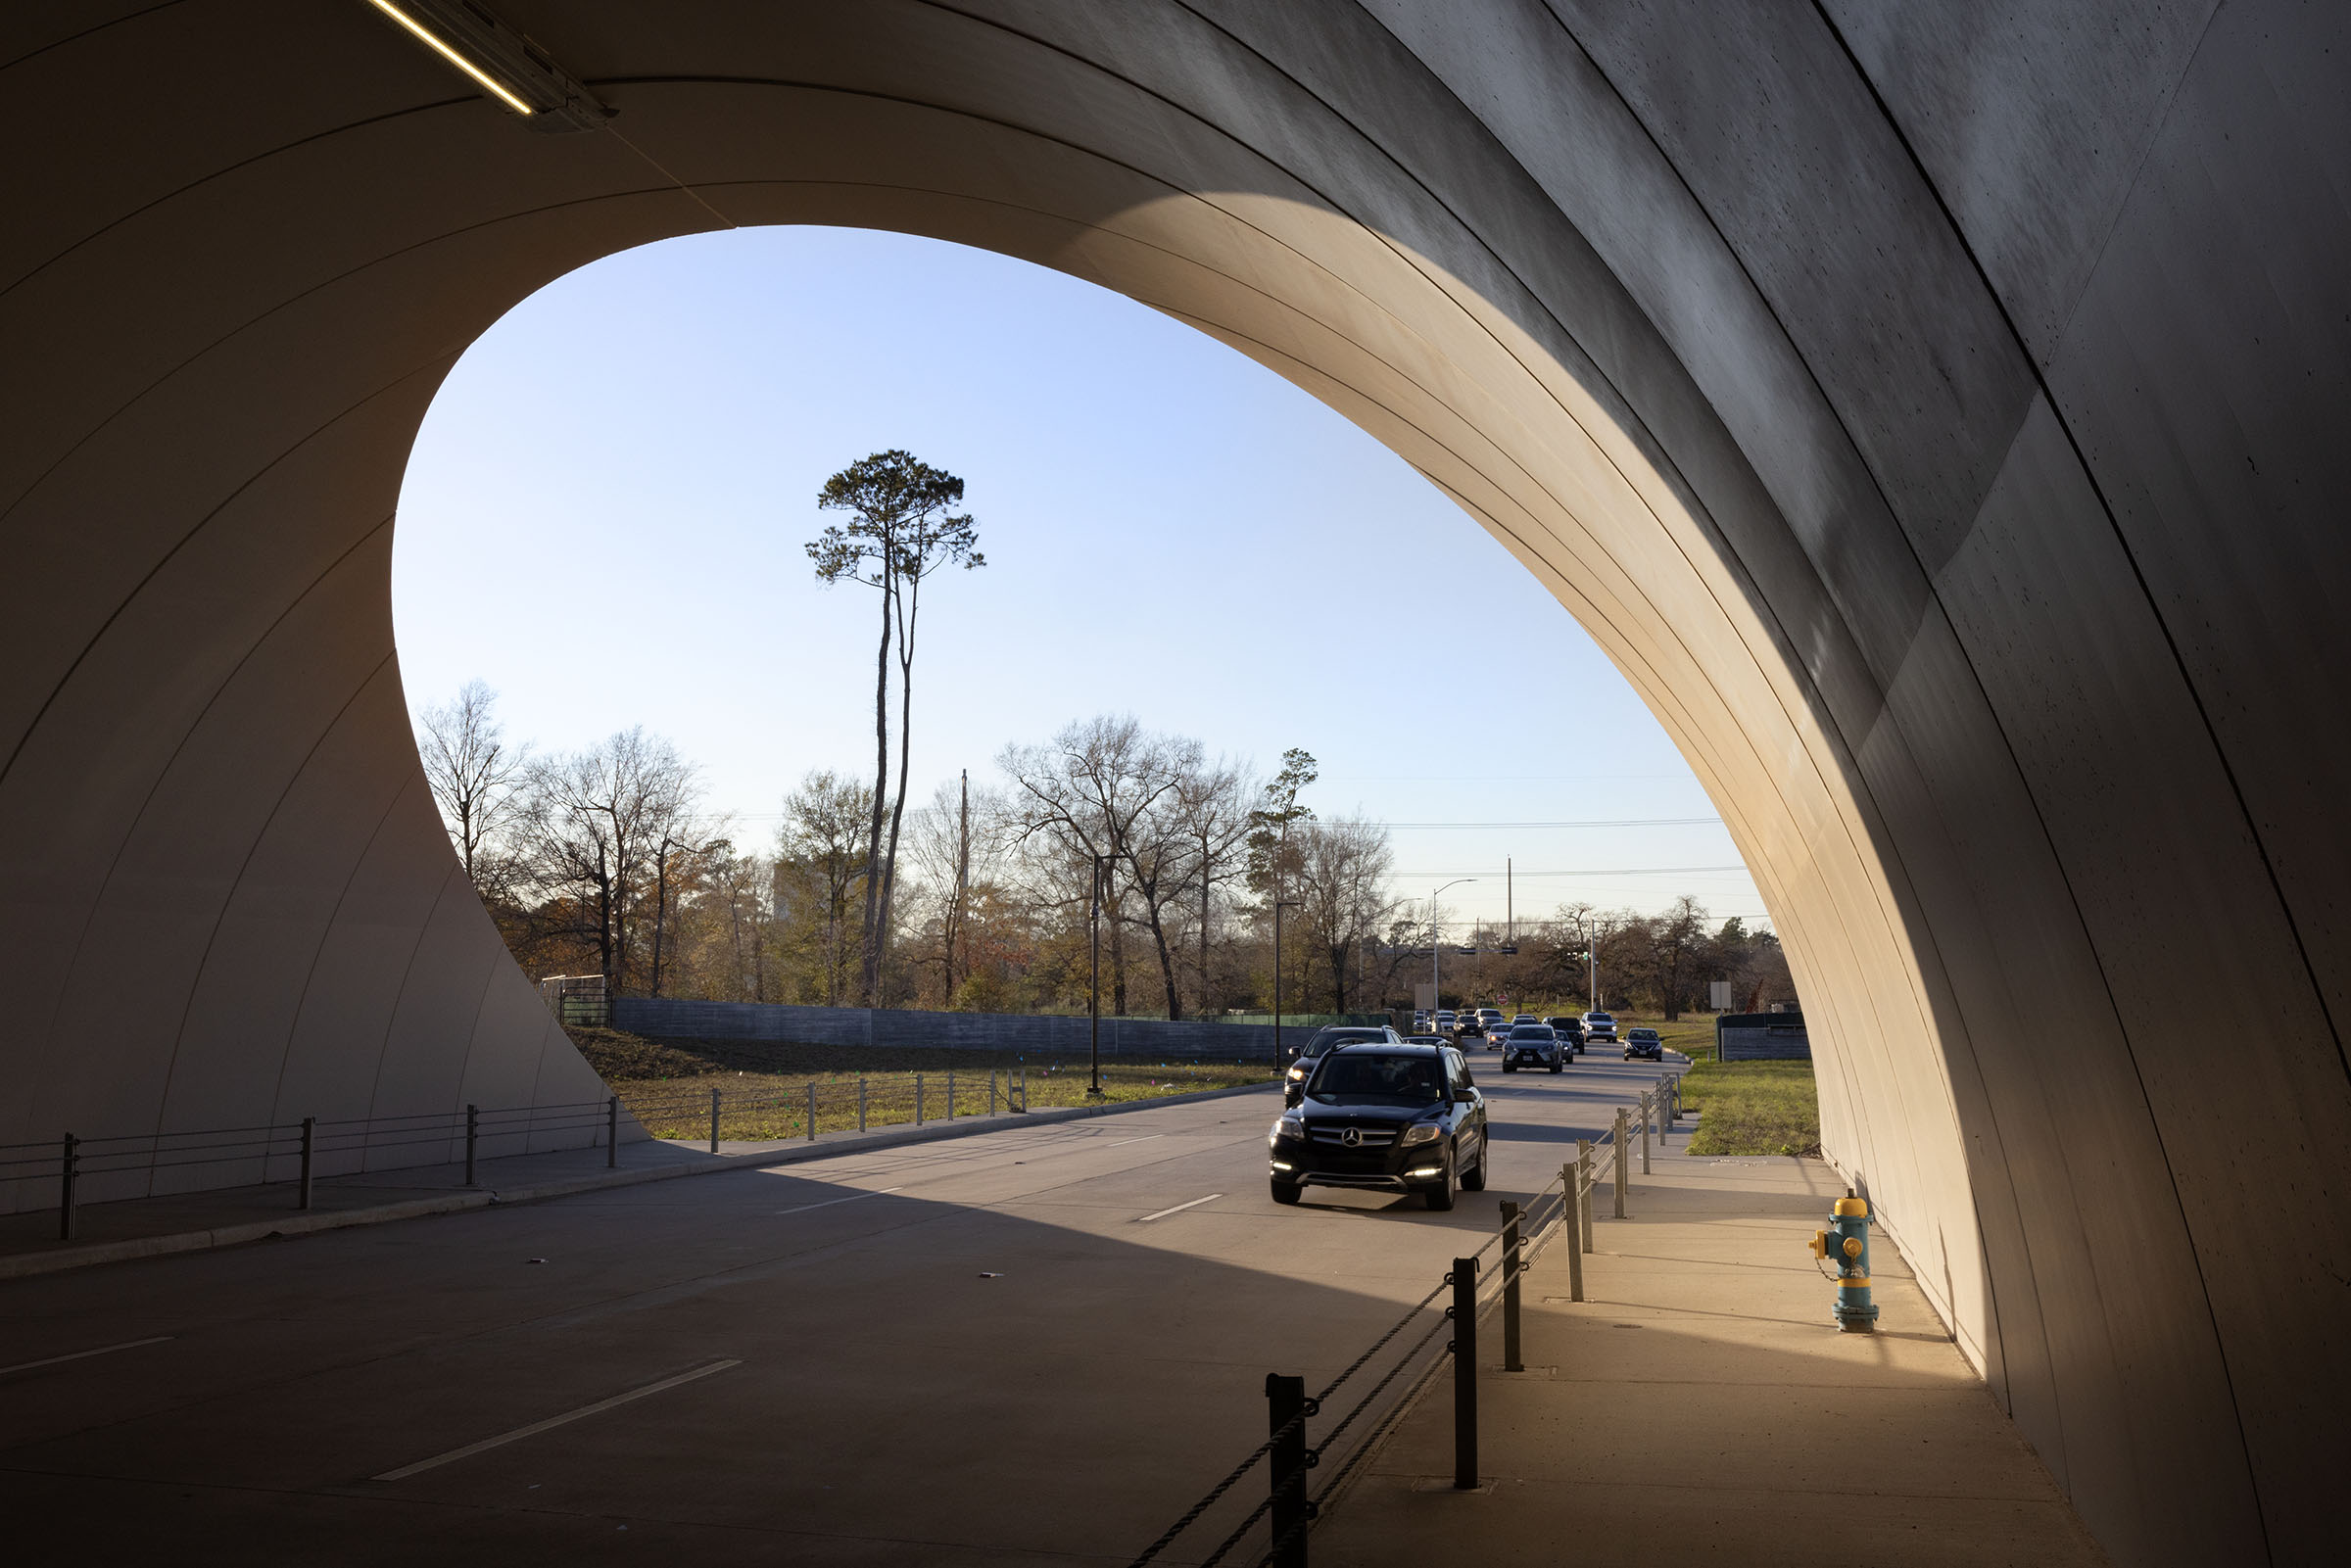 A car approaches a tunnel entrance with blue sky and tall trees behind